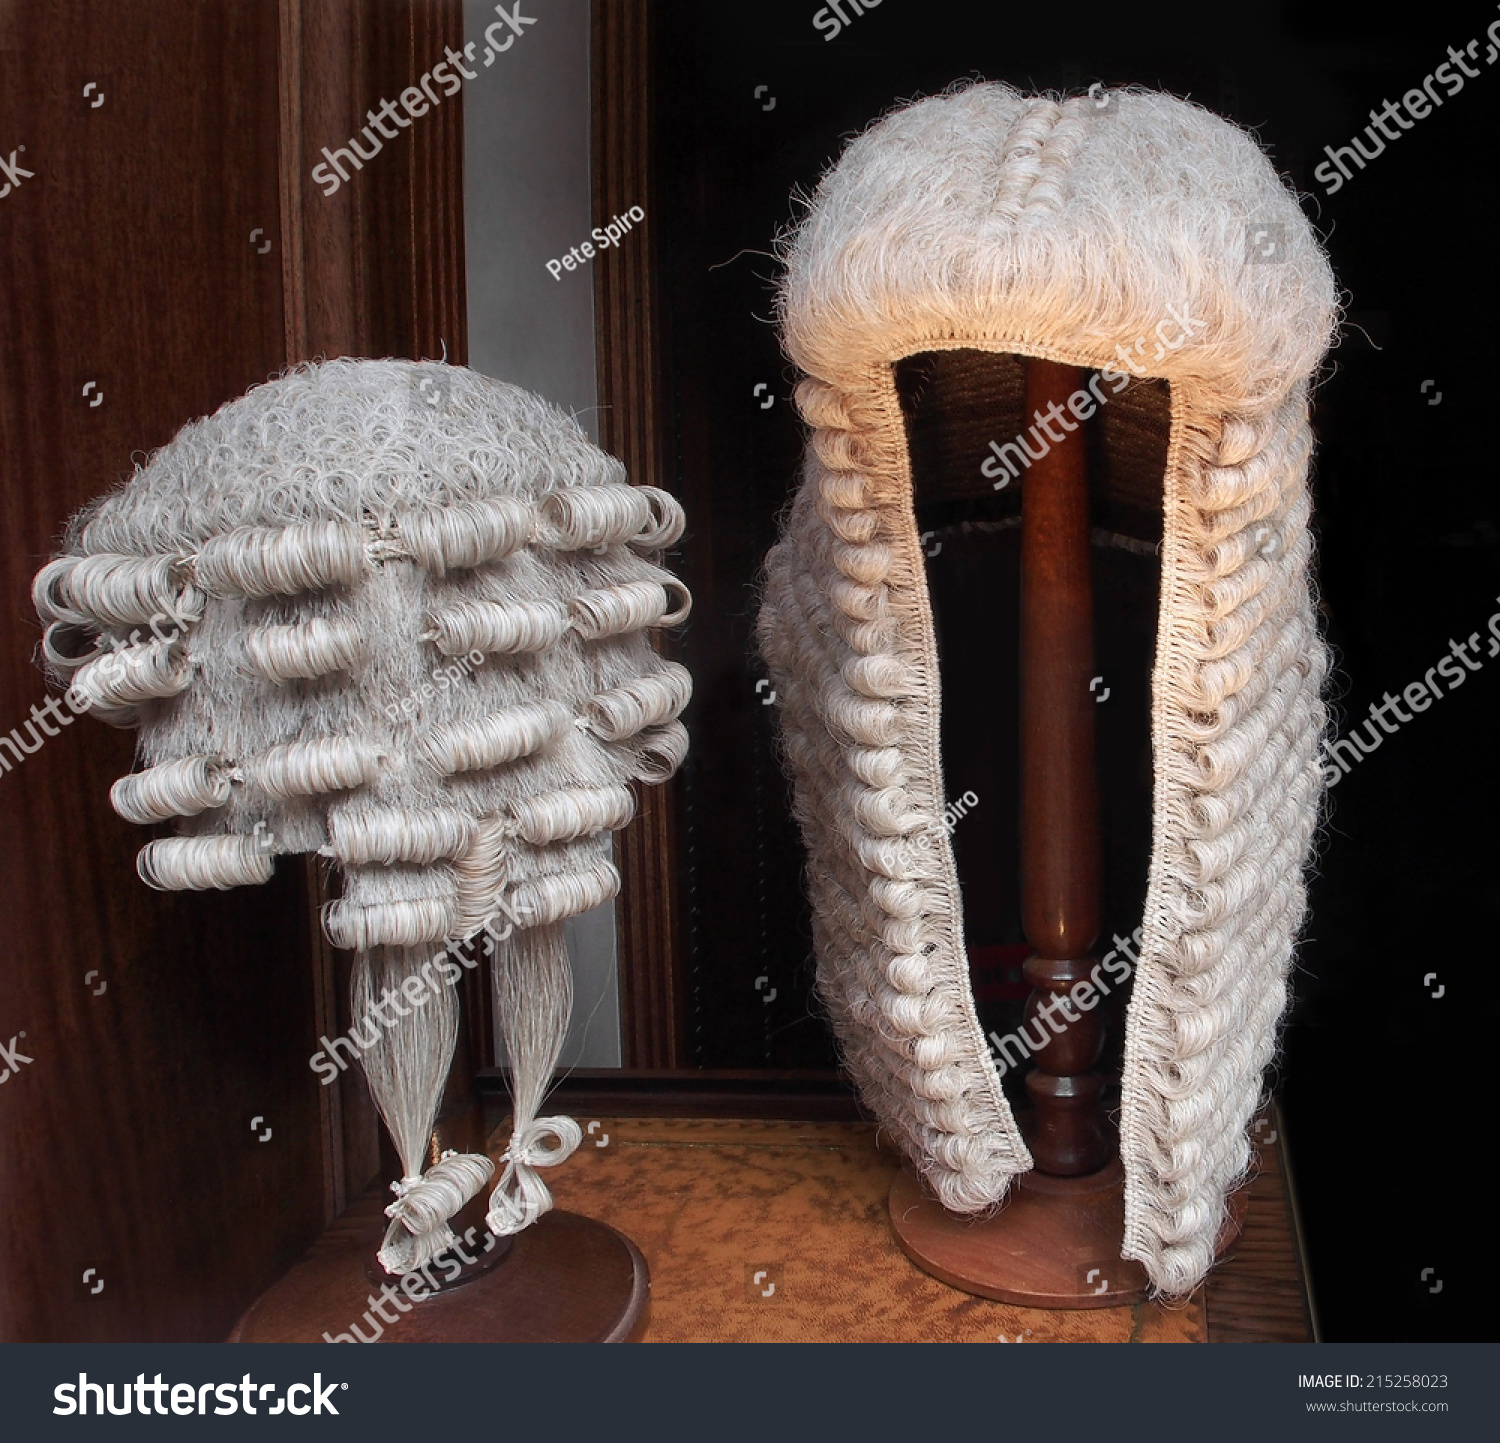 Why Are Wigs Worn In British Courts